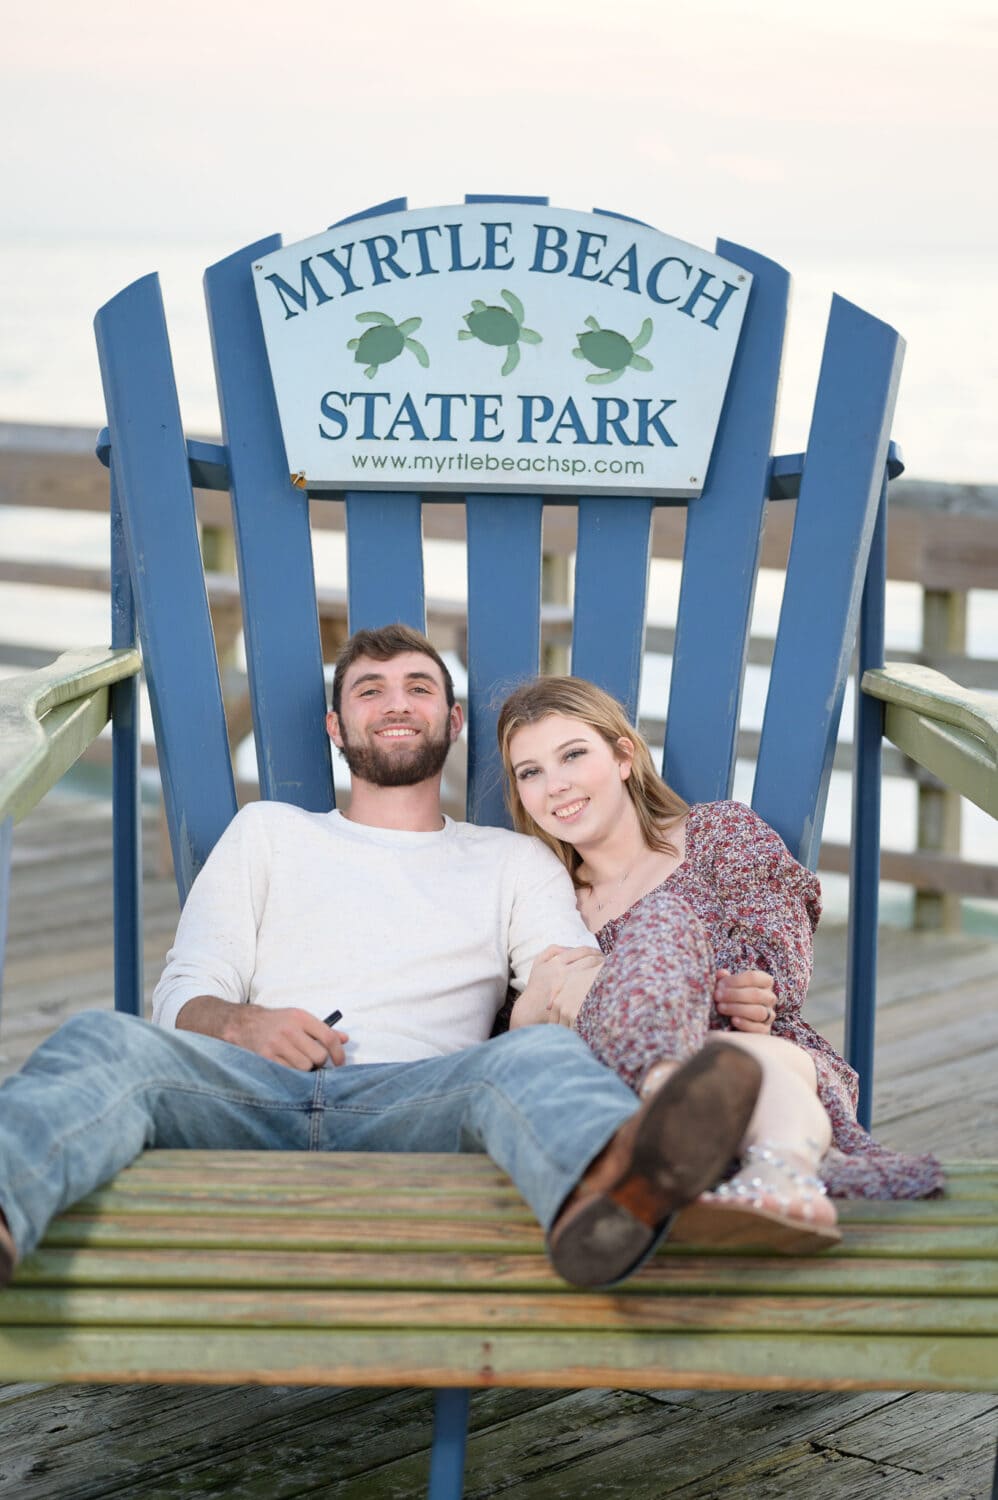 Sitting in the big chair on the pier - Myrtle Beach State Park